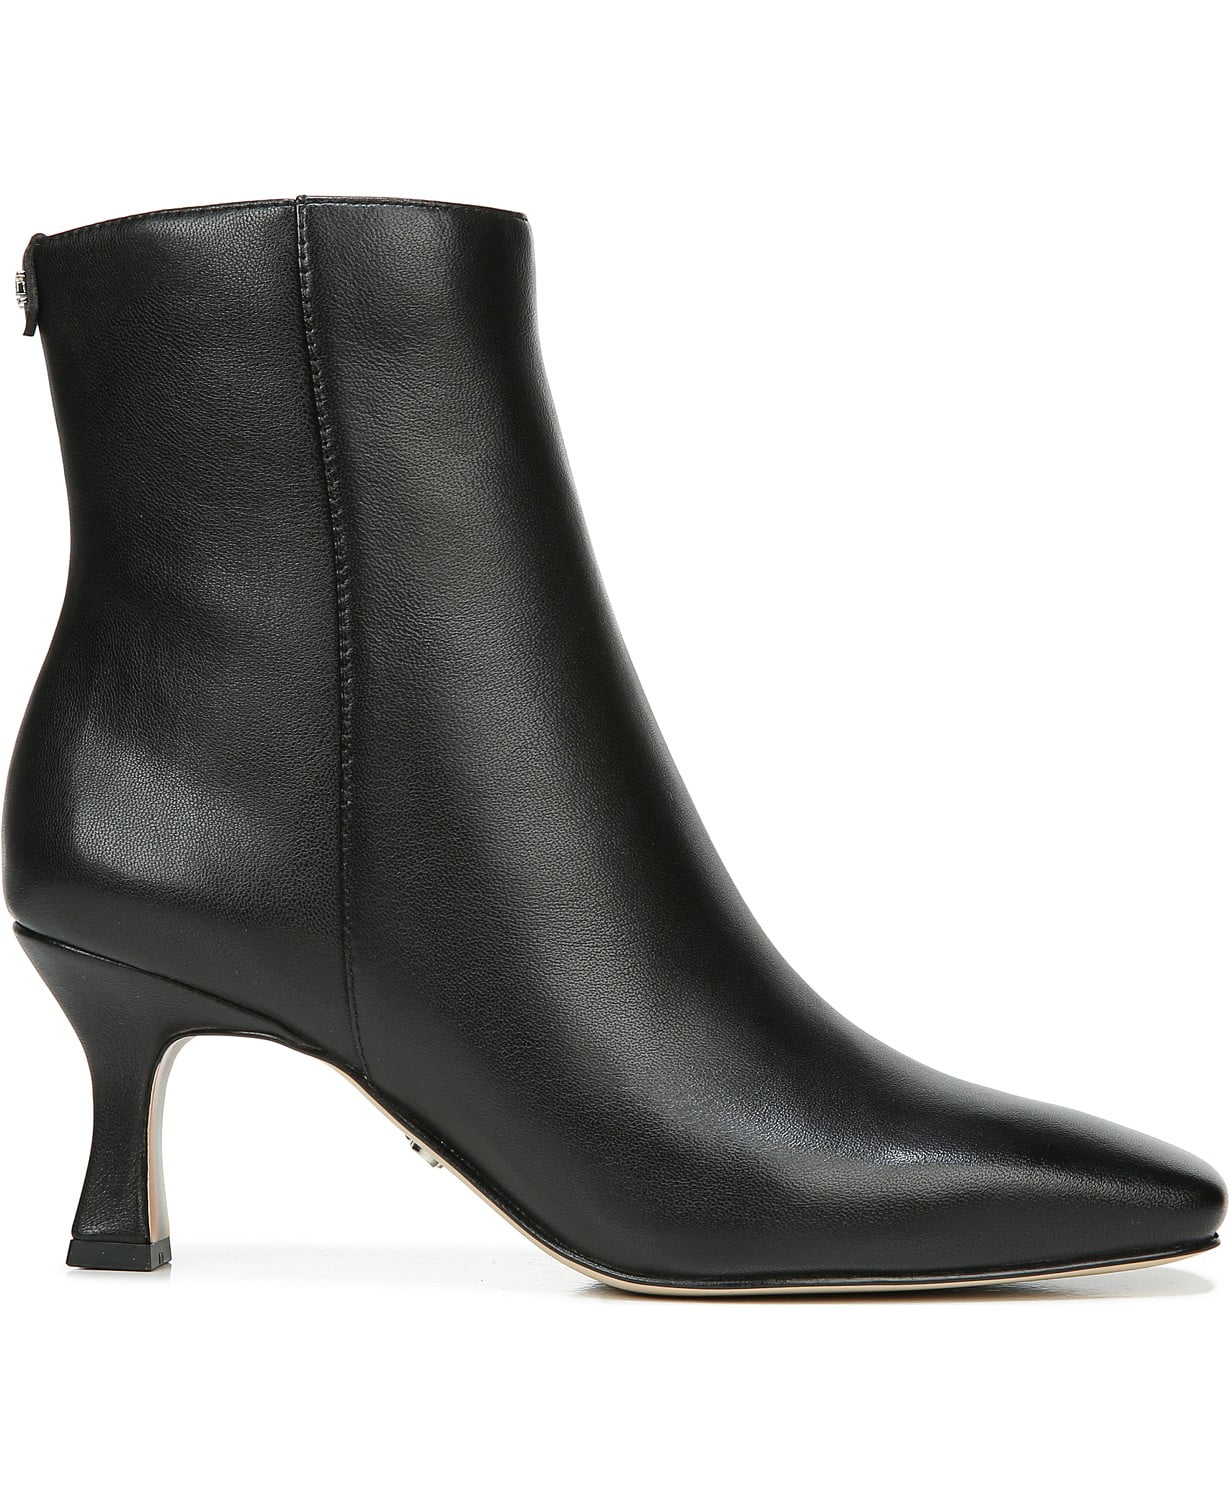 www.couturepoint.com-sam-edelman-womens-black-leather-lizzo-martini-heeled-booties